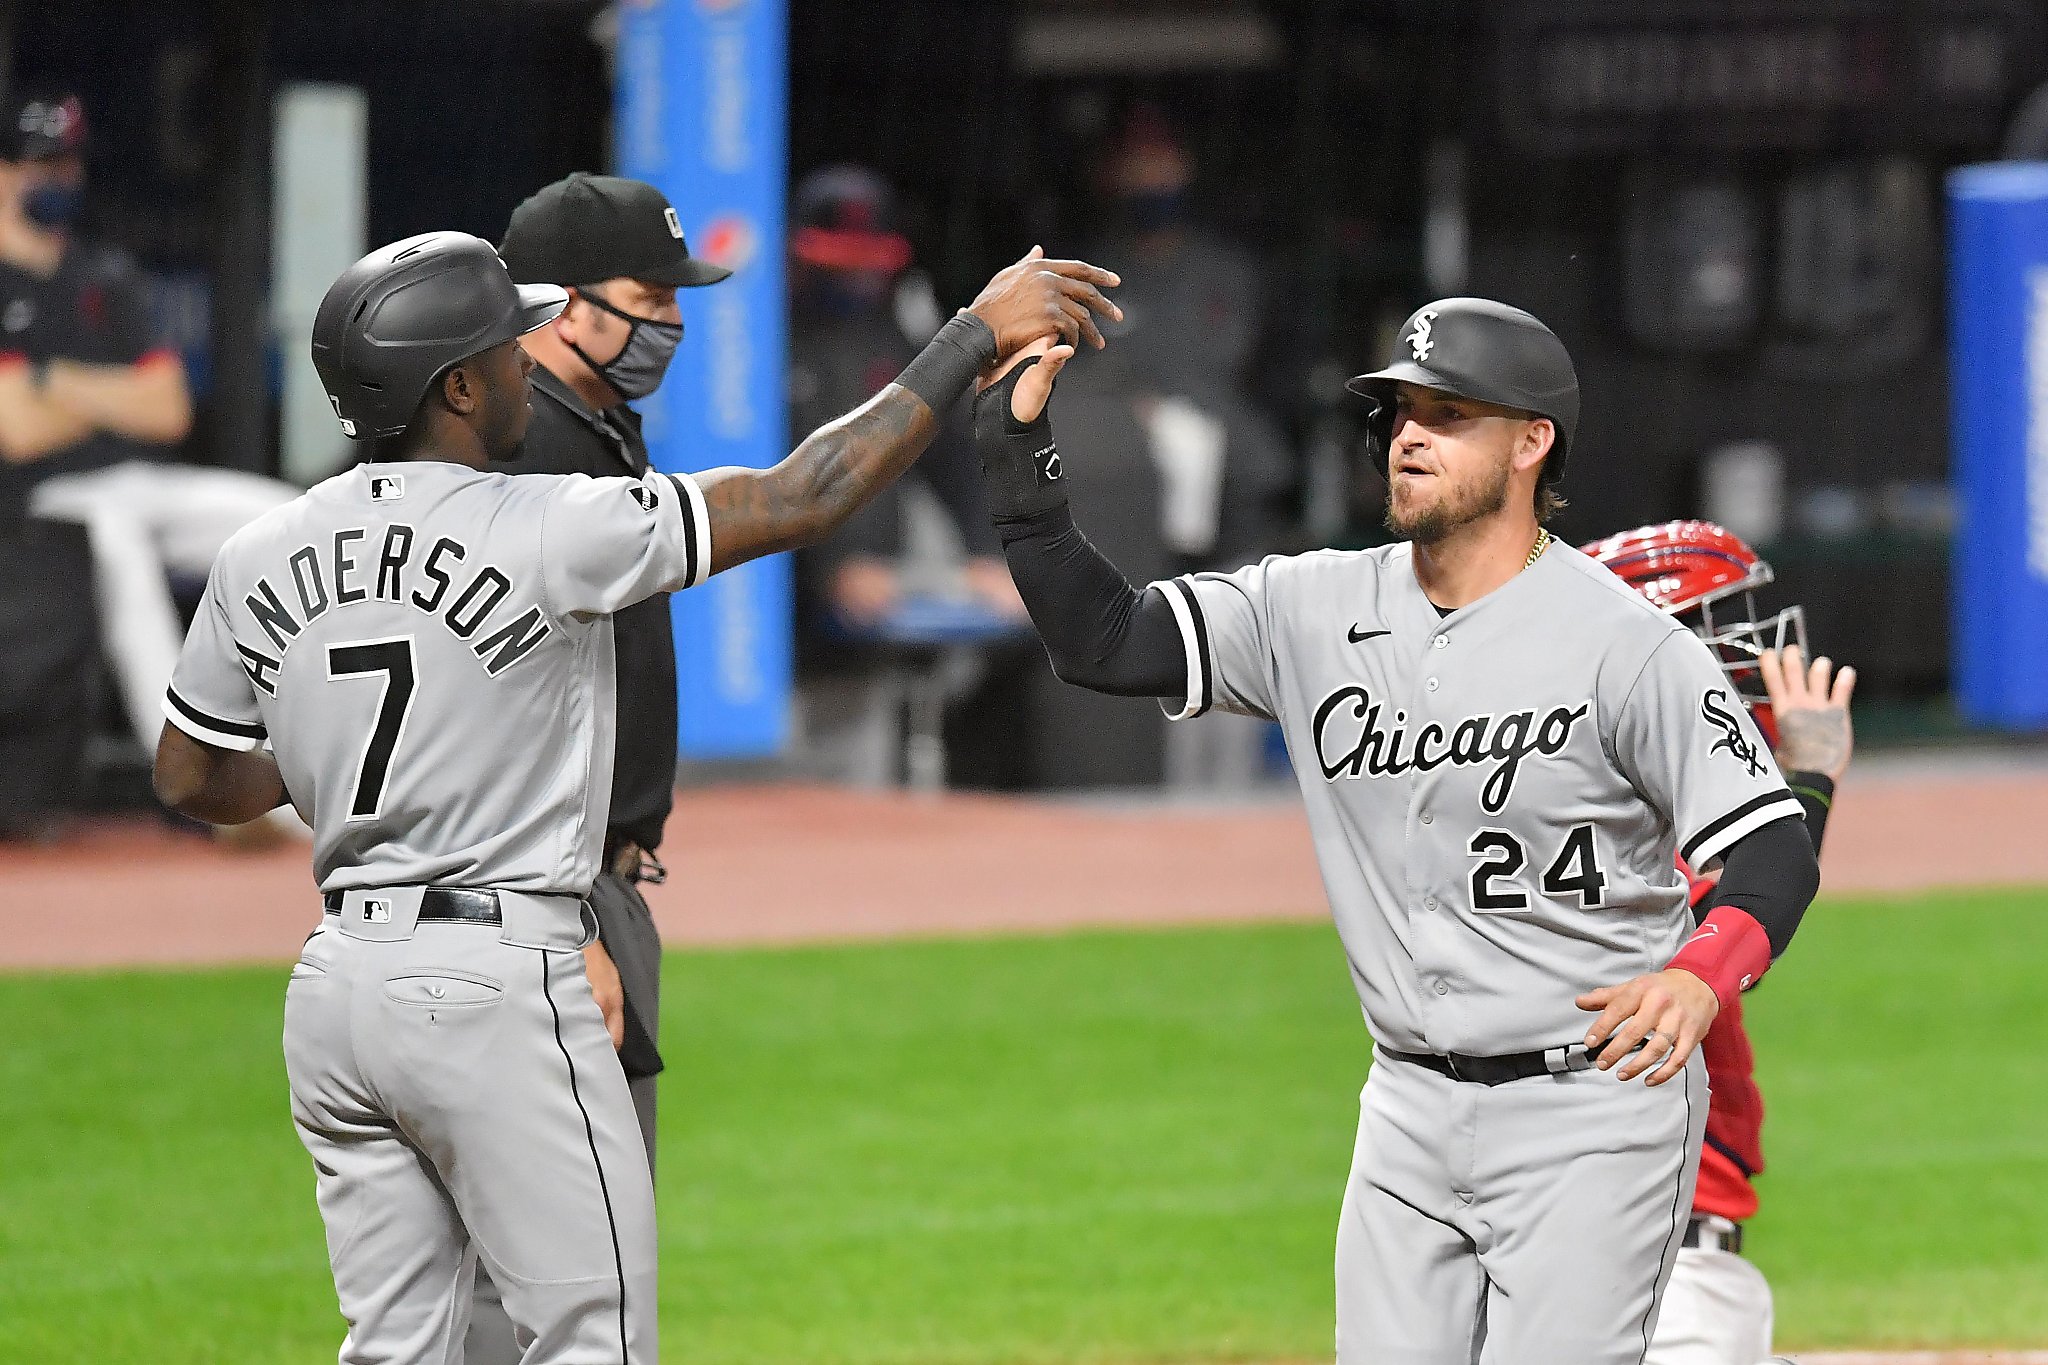 Jose Abreu questions the White Sox' ability to win - South Side Sox